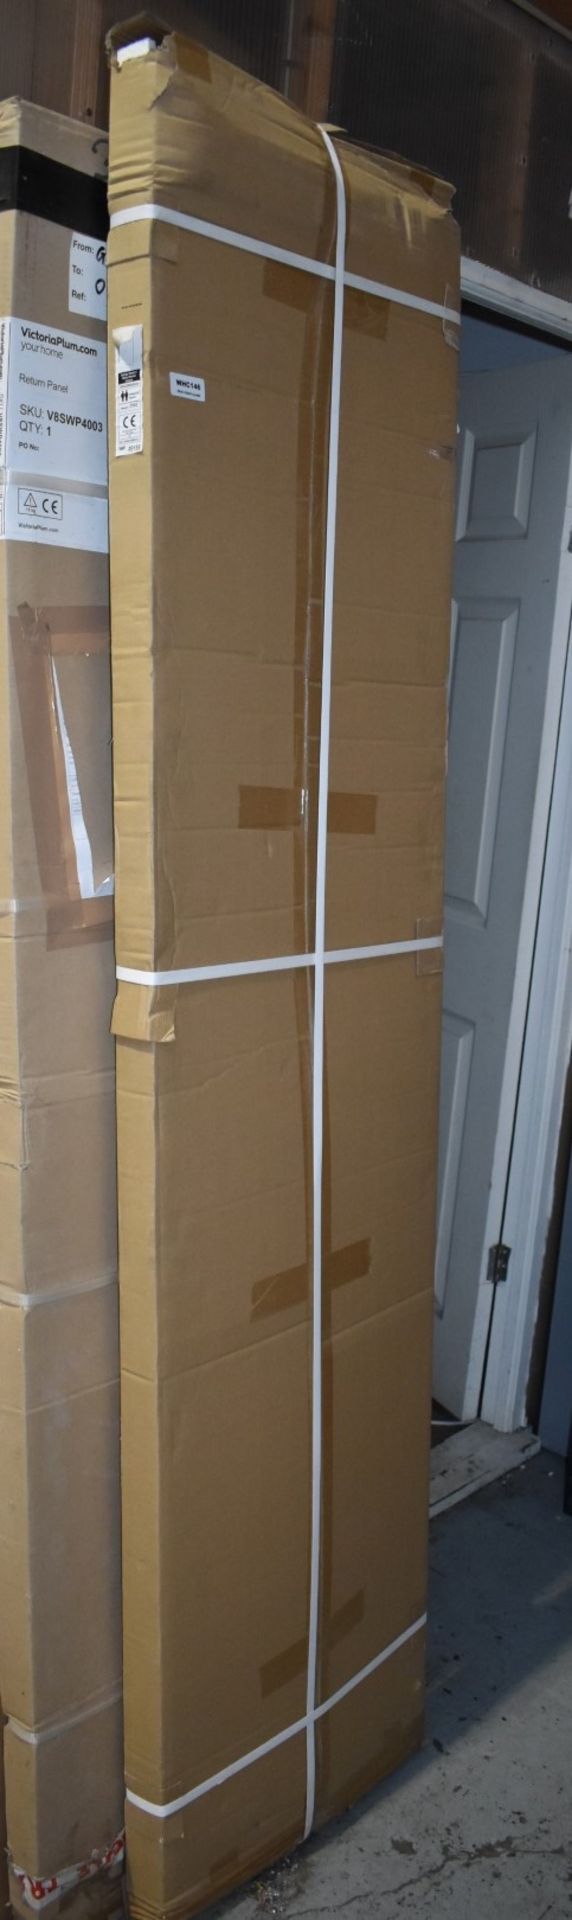 1 x Synergy Technik 500mm Wetroom Shower Screen Deflector - 500x200x8mm - New and Boxed - Ref WHC146